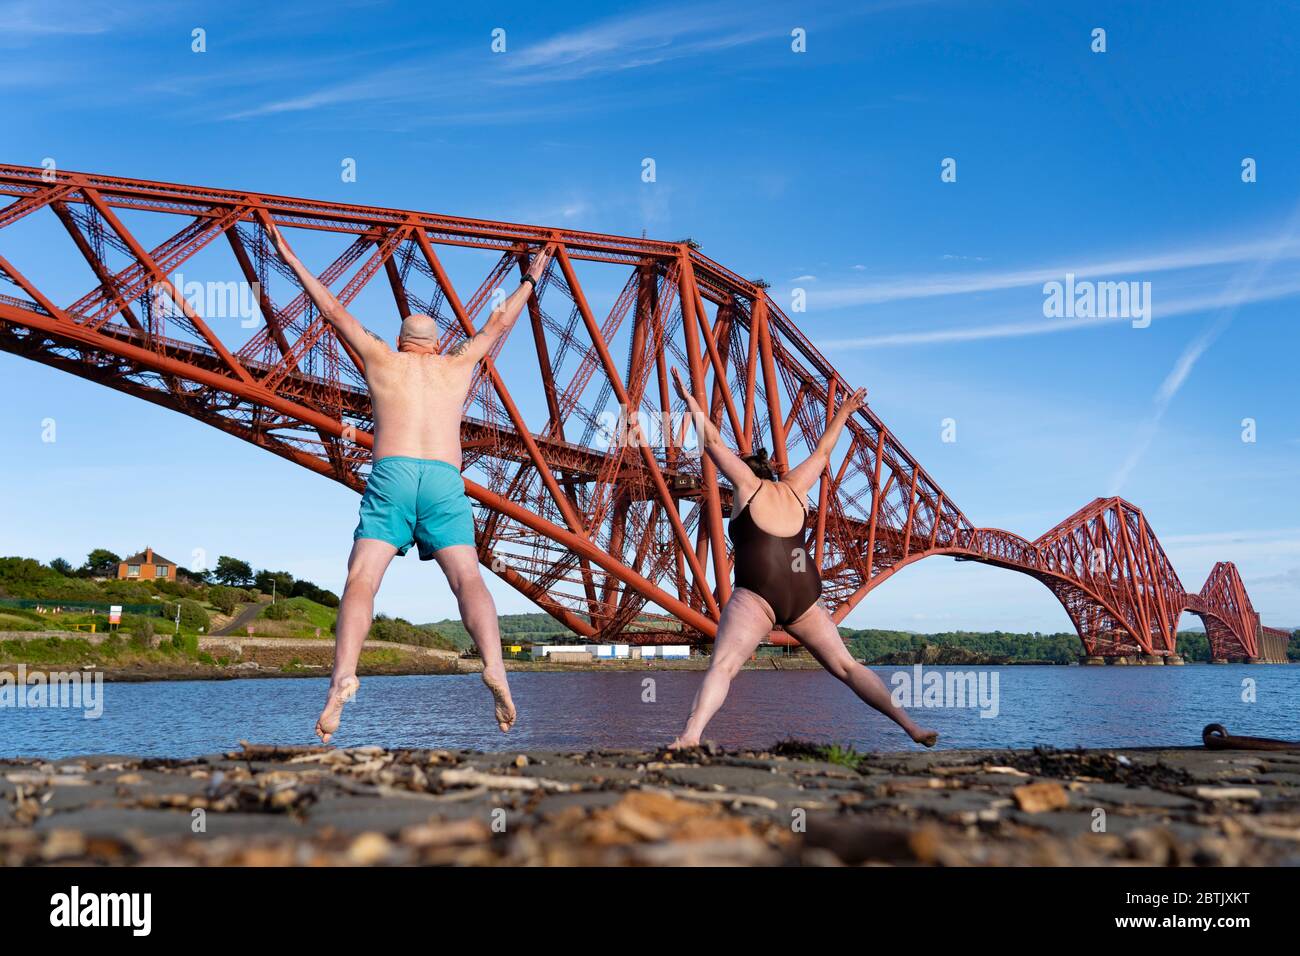 North Queensferry, Scotland, UK. 26 May 2020. Kenny McAlpine and Jenny Waring from Fife Wild Swimmers group make the most of the warm sunshine and an exercise escape from the Covid-19 lockdown and jump into the Firth of Forth at North Queensferry with the Forth Bridge as a dramatic backdrop. Iain Masterton/Alamy Live News Stock Photo